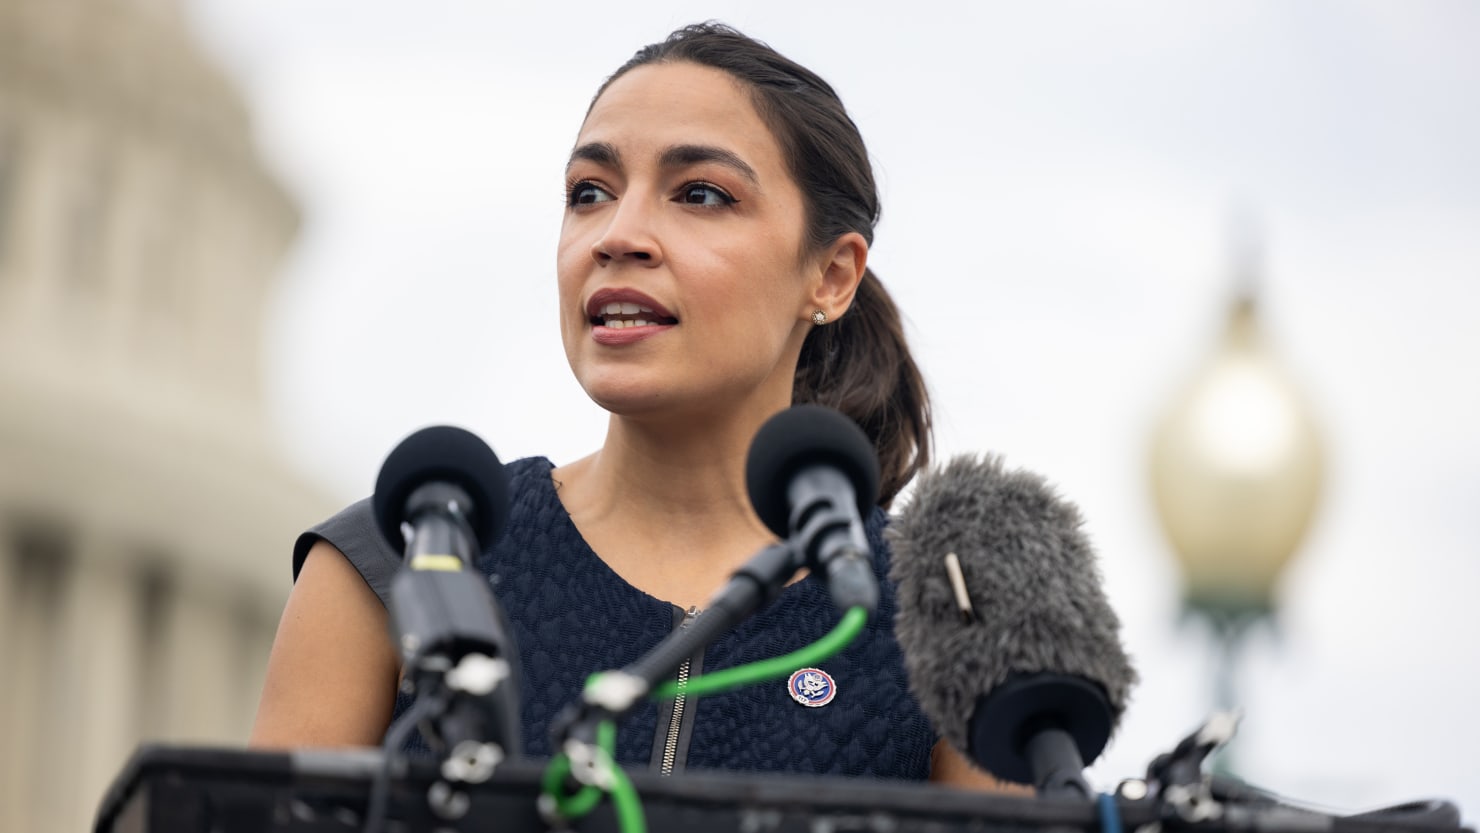 Ocasio Cortez Win Is A Warning To Stale Democratic Leaders